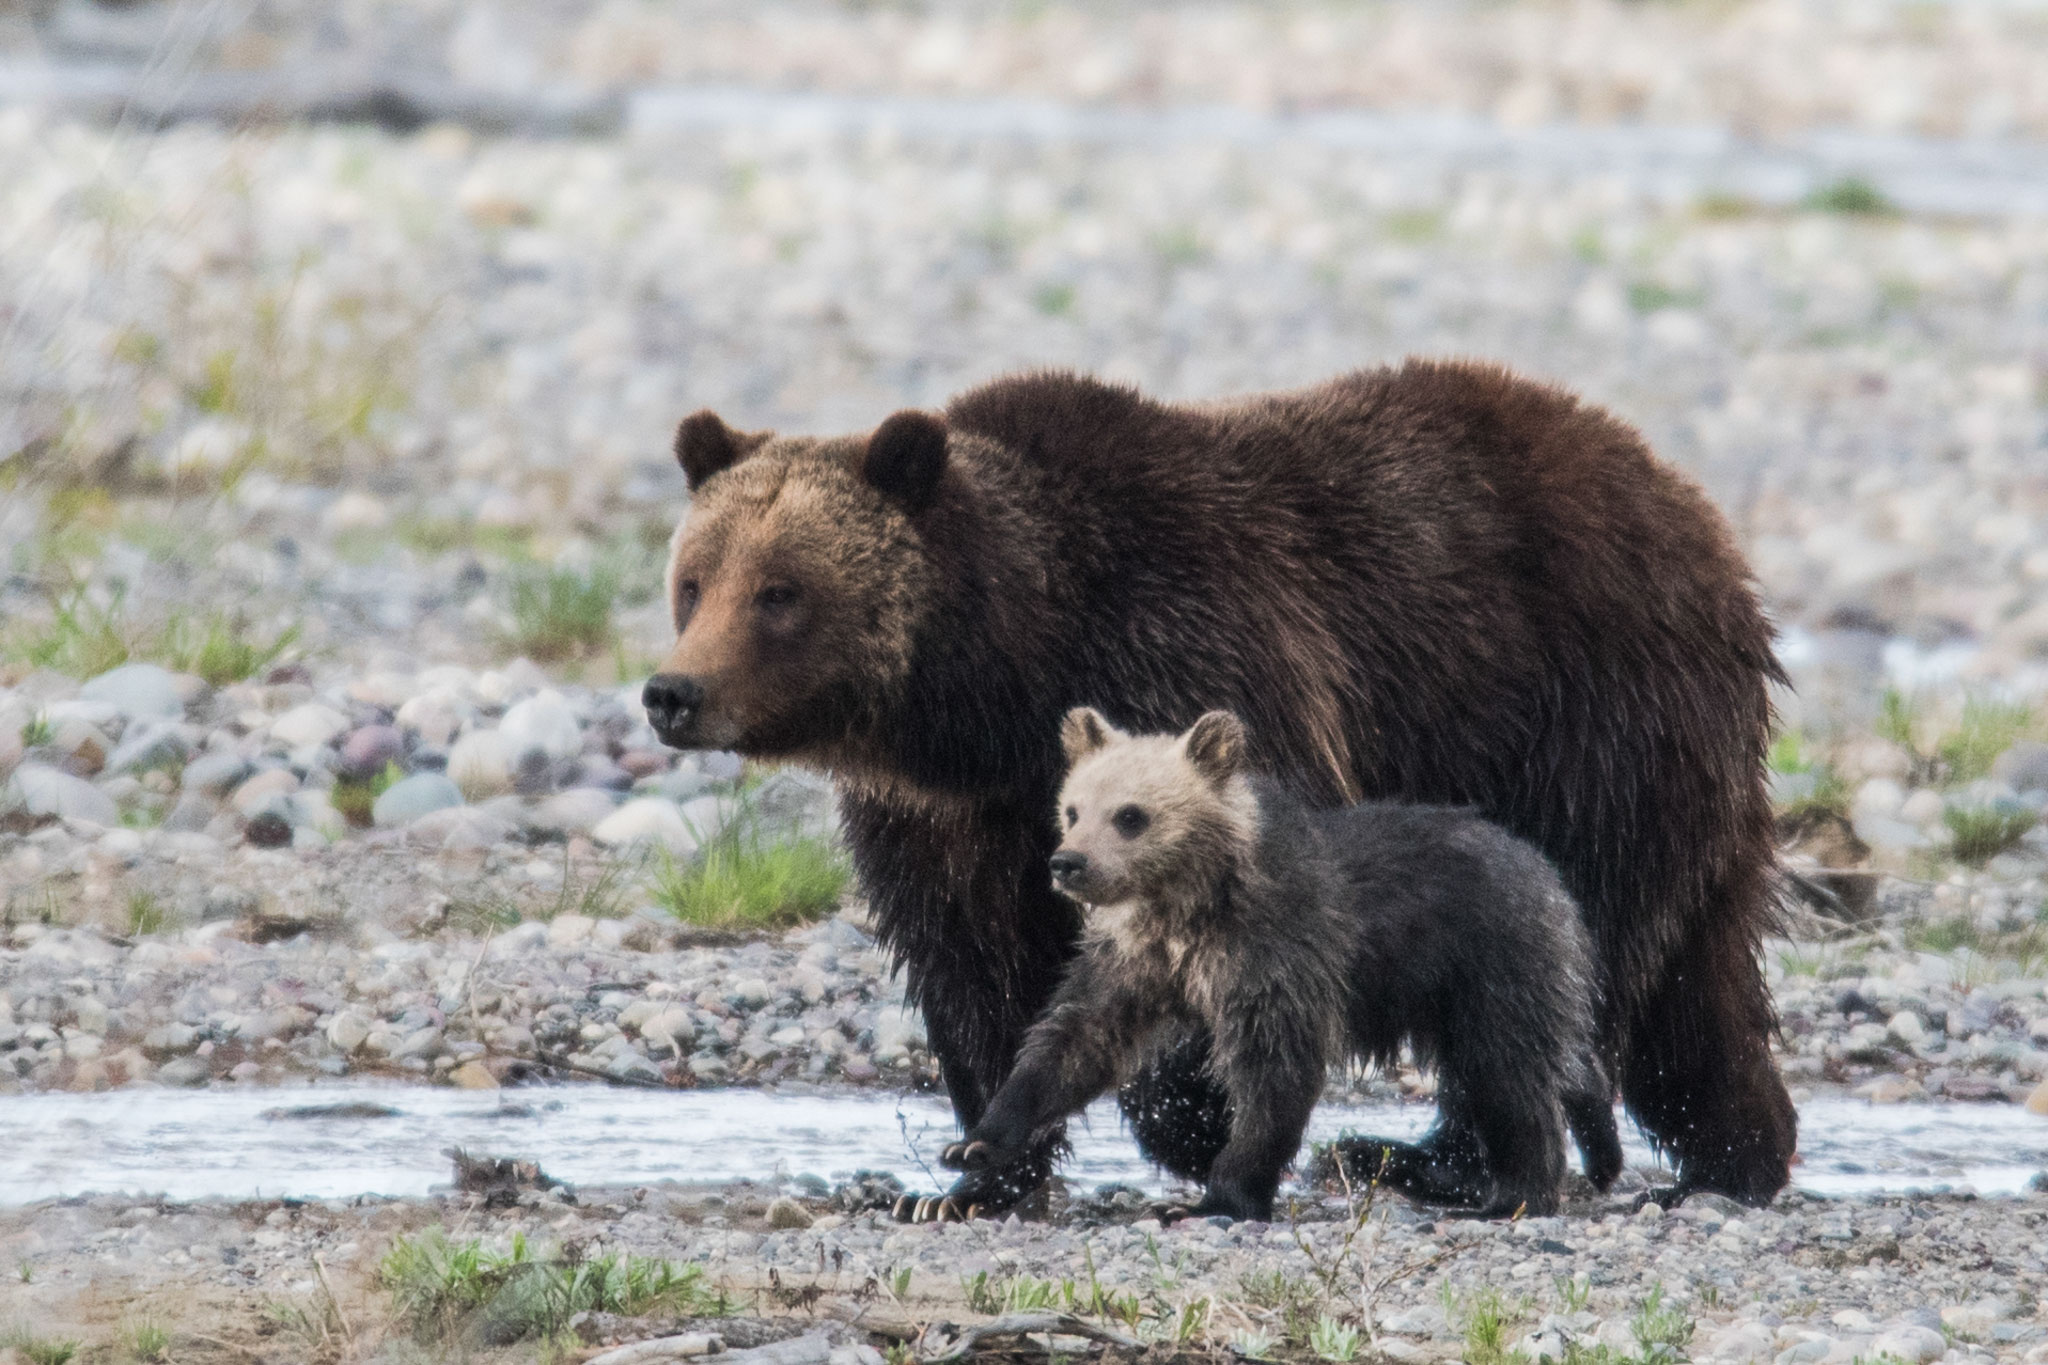 Famous Bear Cub Killed in Hit and Run in National Park